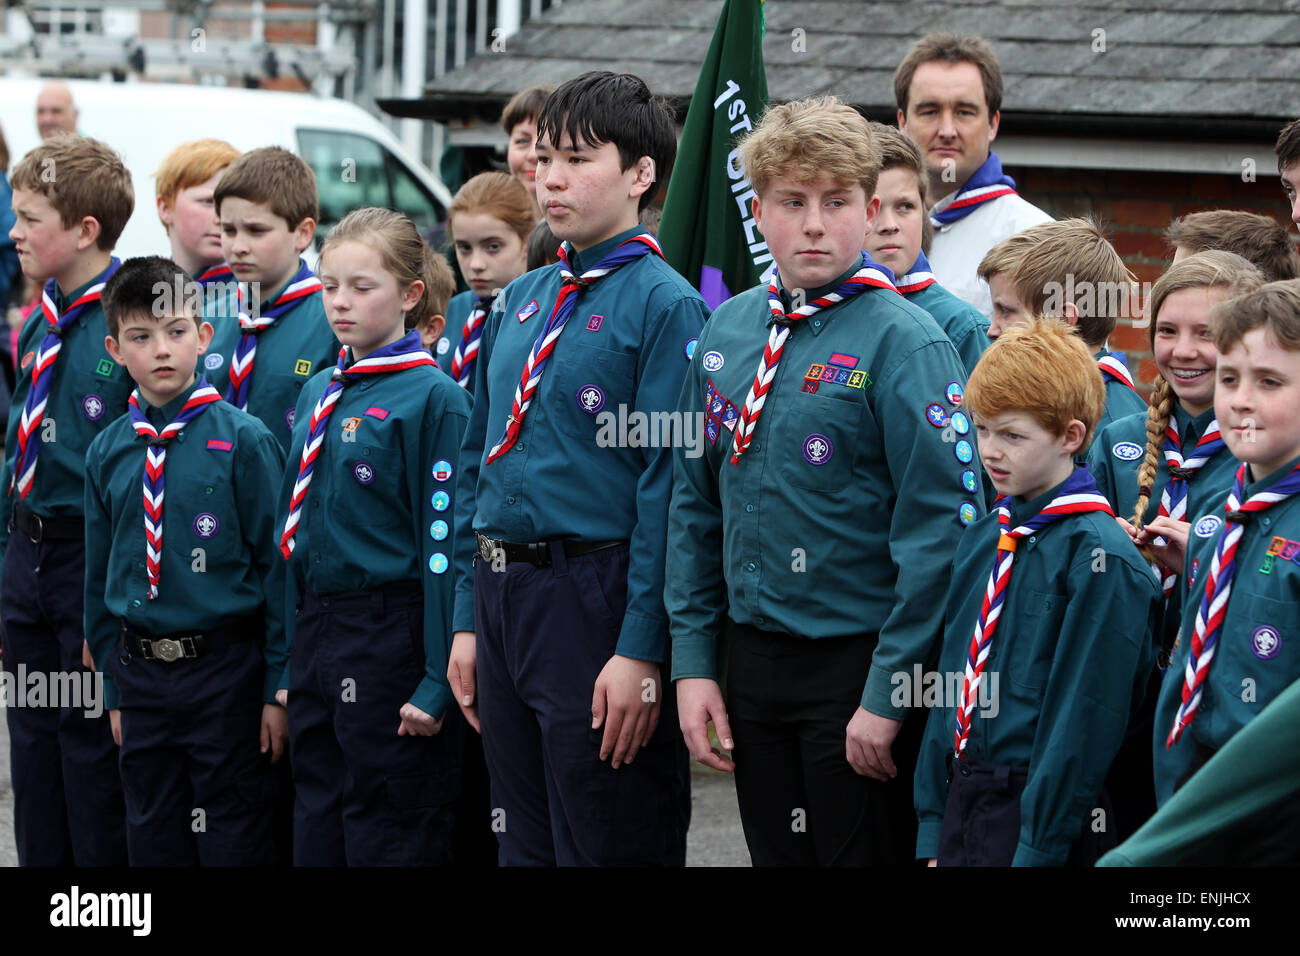 Scouts pictured on a march through Petworth on St Georges Day 2015, West Sussex, UK. Stock Photo